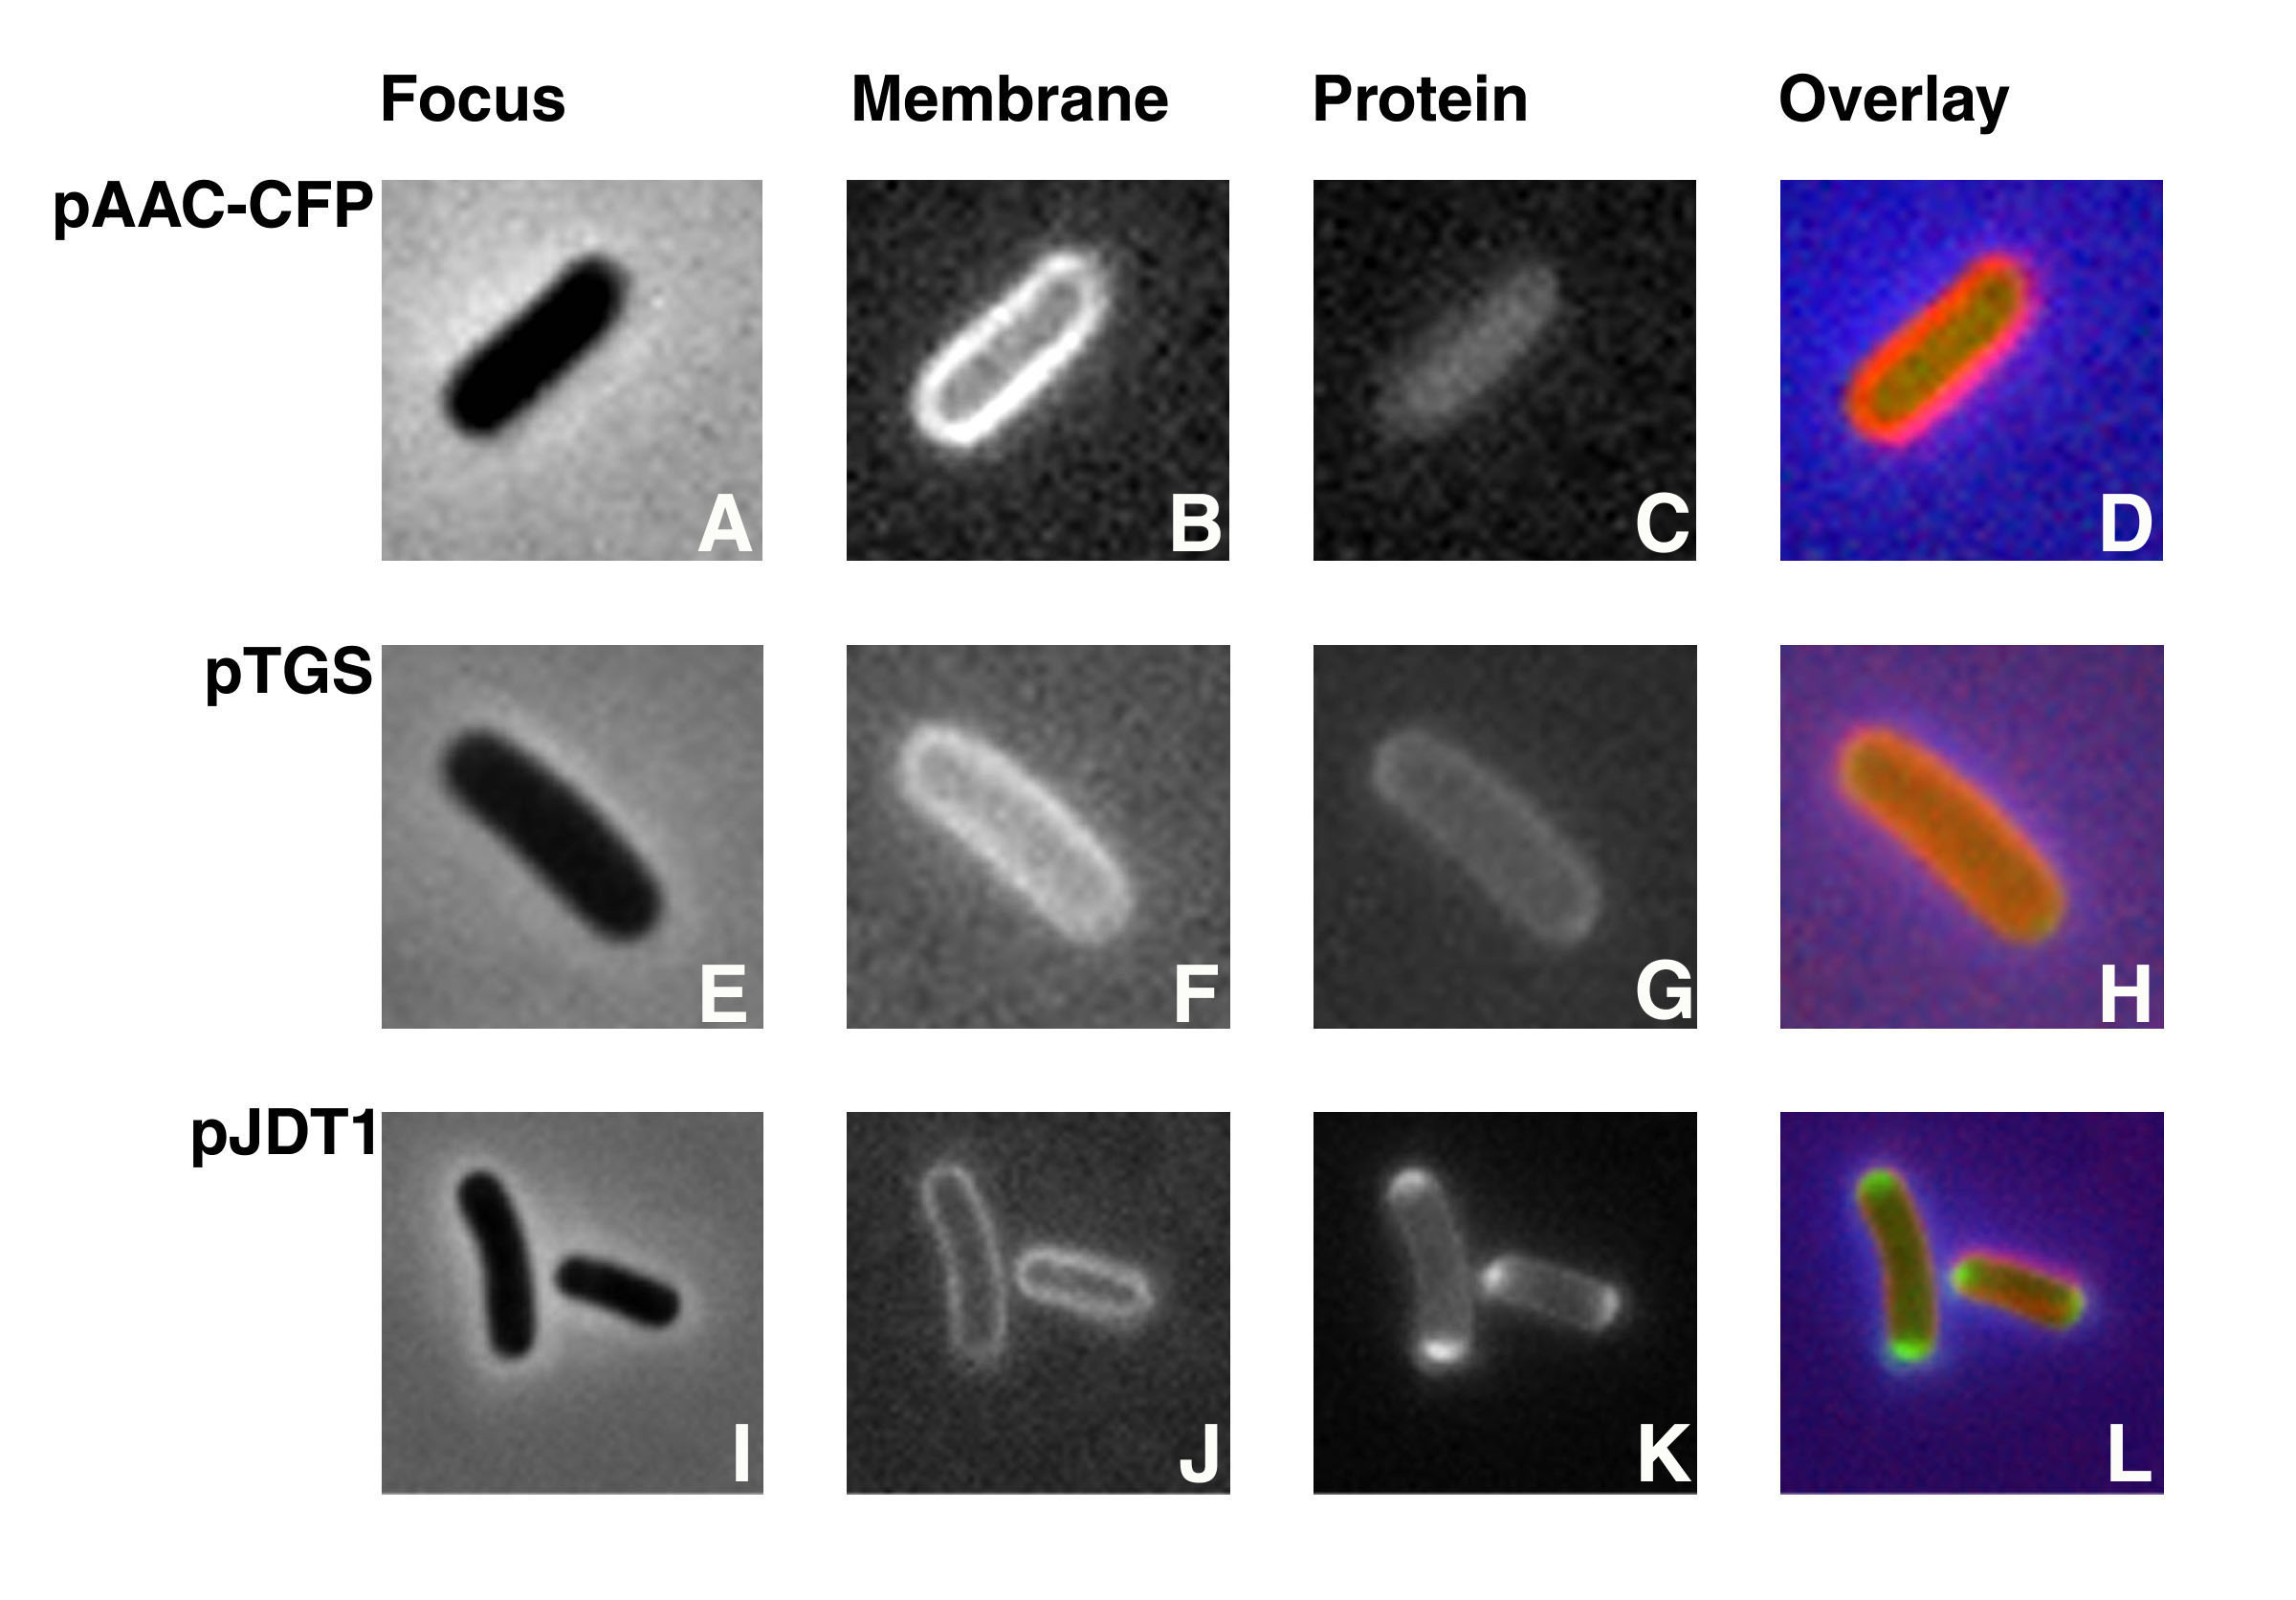 Visualization of protein fusions by fluorescence microscopy. Cells containing pAACCFP, pTGS, or pJDT1 treated as described (Dery et al. Antimicrob. Agents Chemother. 2003 47:2897-2902). Plasmids pTGS and pJDT1 were used as controls, they code for periplasmic proteins. However, Thomas et al. determined that the protein encoded by pJDT1 was located in the periplasmic space accumulating at the ends of the cell (Thomas et al. Mol. Microbiol. 2001 39:47-53). The membranes of all three strains were stained by incubation in 200 µg of FM5-95/ml at 37°C with shaking for 15 min. Cells were focused (A, E, and I) and examined using filter sets 31044v2 to detect CFP (C), 31019 to detect GFP (G and K), and 31058 to detect FM5-95 (B, F, and J). Overlays were generated by coloring the membranes red and the fusion proteins green (D, H, and L). AAC(6')-Ib is homogeneously distributed in the cell's cytoplasm. Figure taken from Dery et al. Antimicrob. Agents Chemother. 2003 47:2897-2902.